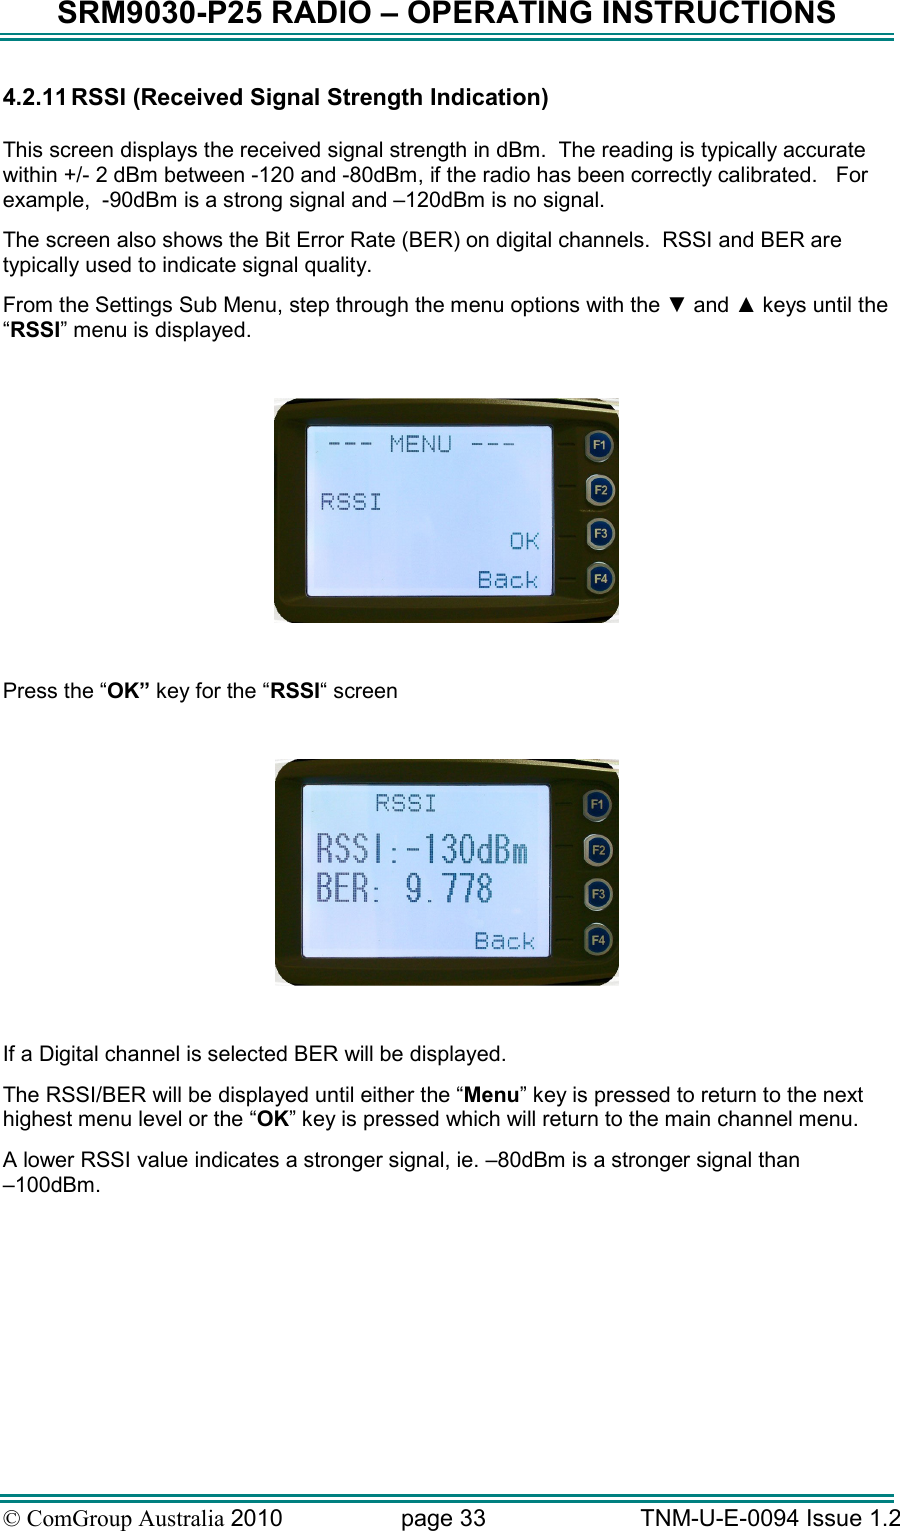 SRM9030-P25 RADIO – OPERATING INSTRUCTIONS © ComGroup Australia 2010  page 33   TNM-U-E-0094 Issue 1.2 4.2.11 RSSI (Received Signal Strength Indication)  This screen displays the received signal strength in dBm.  The reading is typically accurate within +/- 2 dBm between -120 and -80dBm, if the radio has been correctly calibrated.   For example,  -90dBm is a strong signal and –120dBm is no signal. The screen also shows the Bit Error Rate (BER) on digital channels.  RSSI and BER are typically used to indicate signal quality. From the Settings Sub Menu, step through the menu options with the ▼ and ▲ keys until the “RSSI” menu is displayed.    Press the “OK” key for the “RSSI“ screen    If a Digital channel is selected BER will be displayed. The RSSI/BER will be displayed until either the “Menu” key is pressed to return to the next highest menu level or the “OK” key is pressed which will return to the main channel menu. A lower RSSI value indicates a stronger signal, ie. –80dBm is a stronger signal than  –100dBm.     